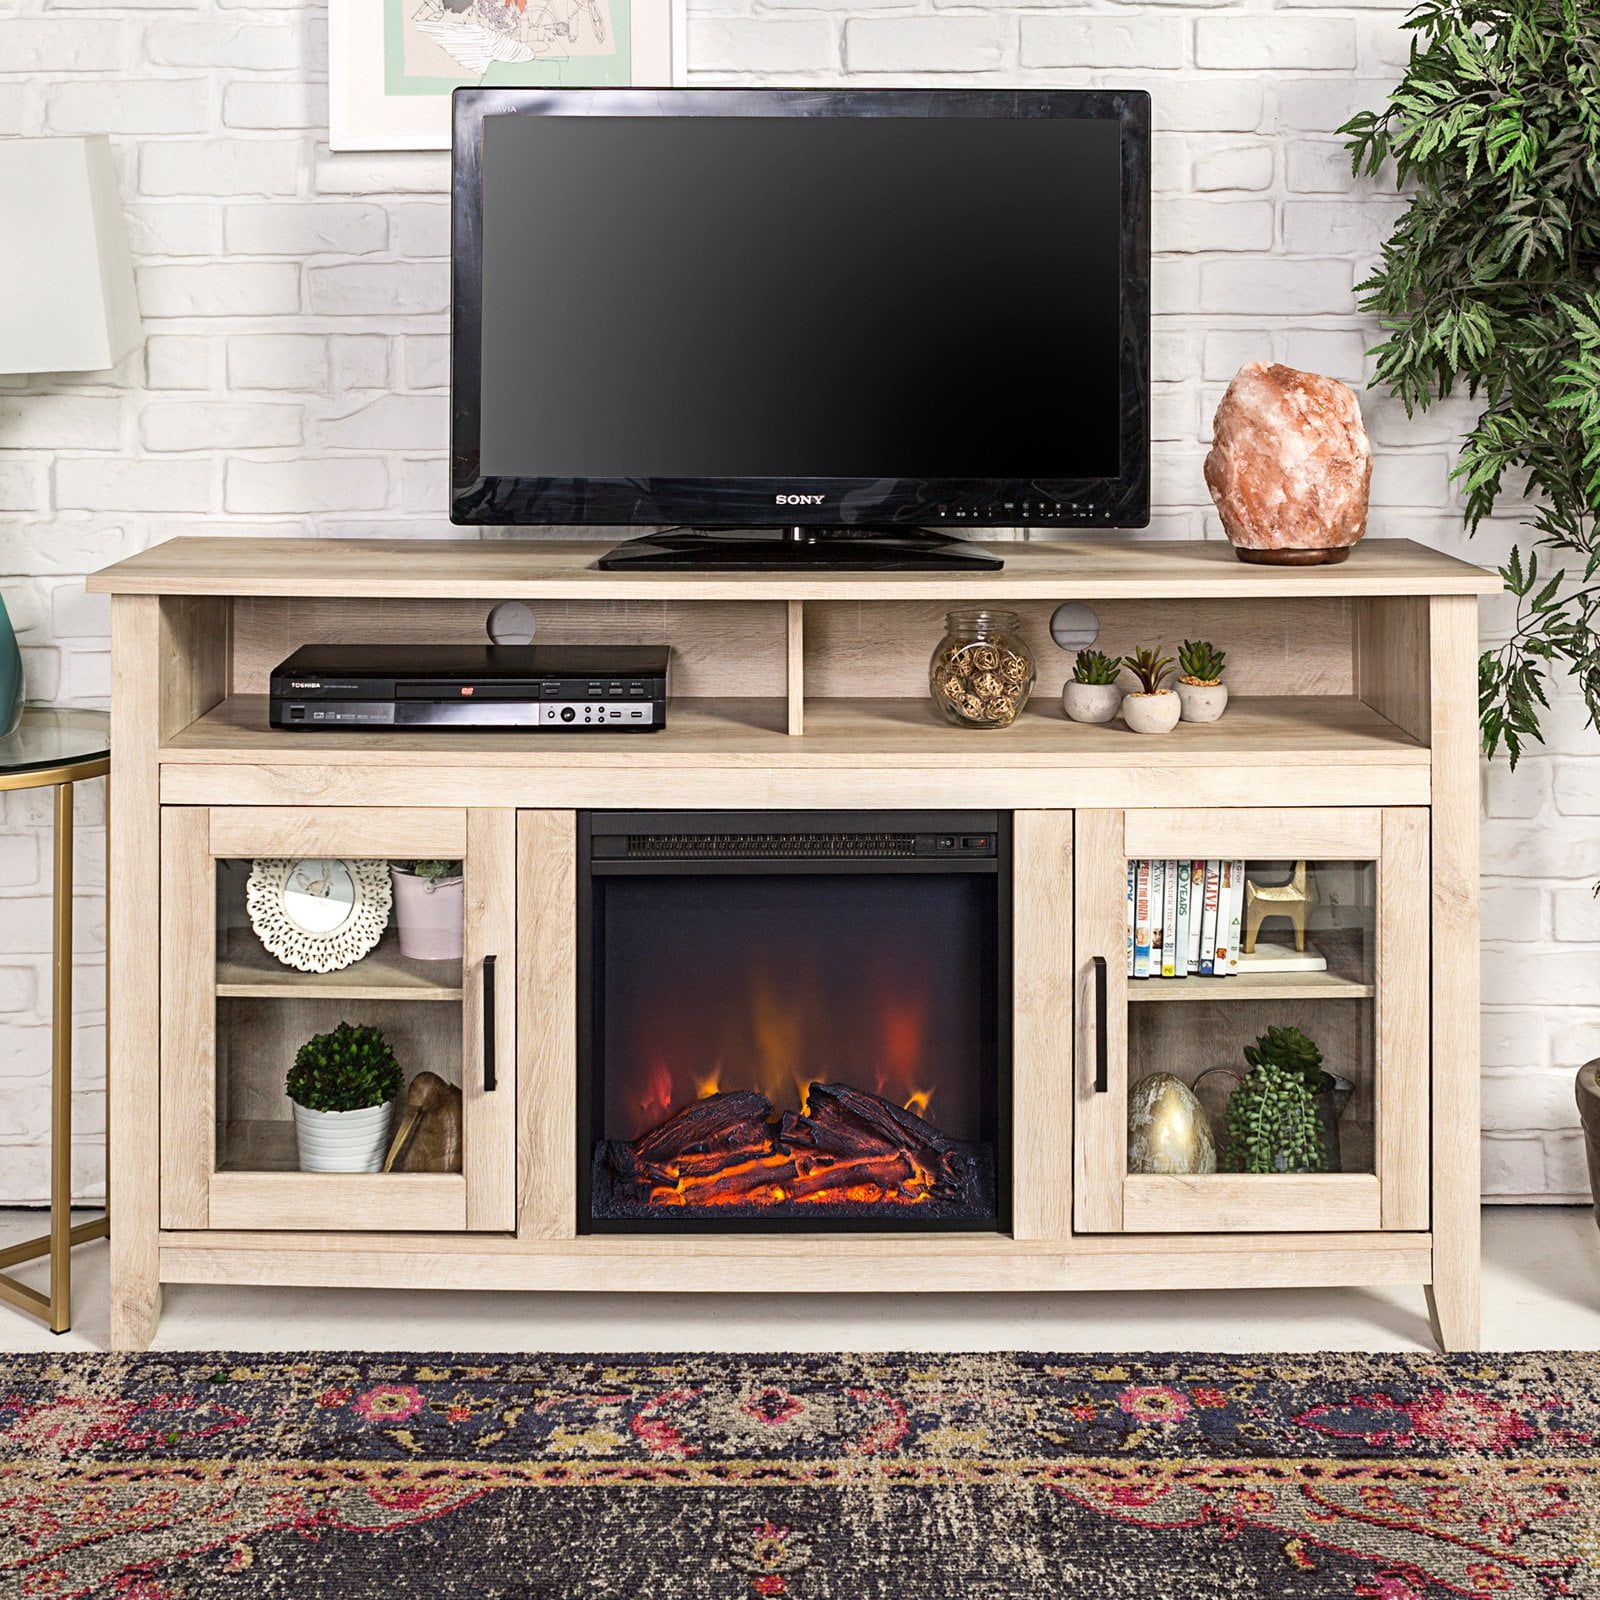 Walker Edison 58 In. Wood Highboy Fireplace Media Tv Stand Console With Regard To Wood Highboy Fireplace Tv Stands (Gallery 2 of 20)